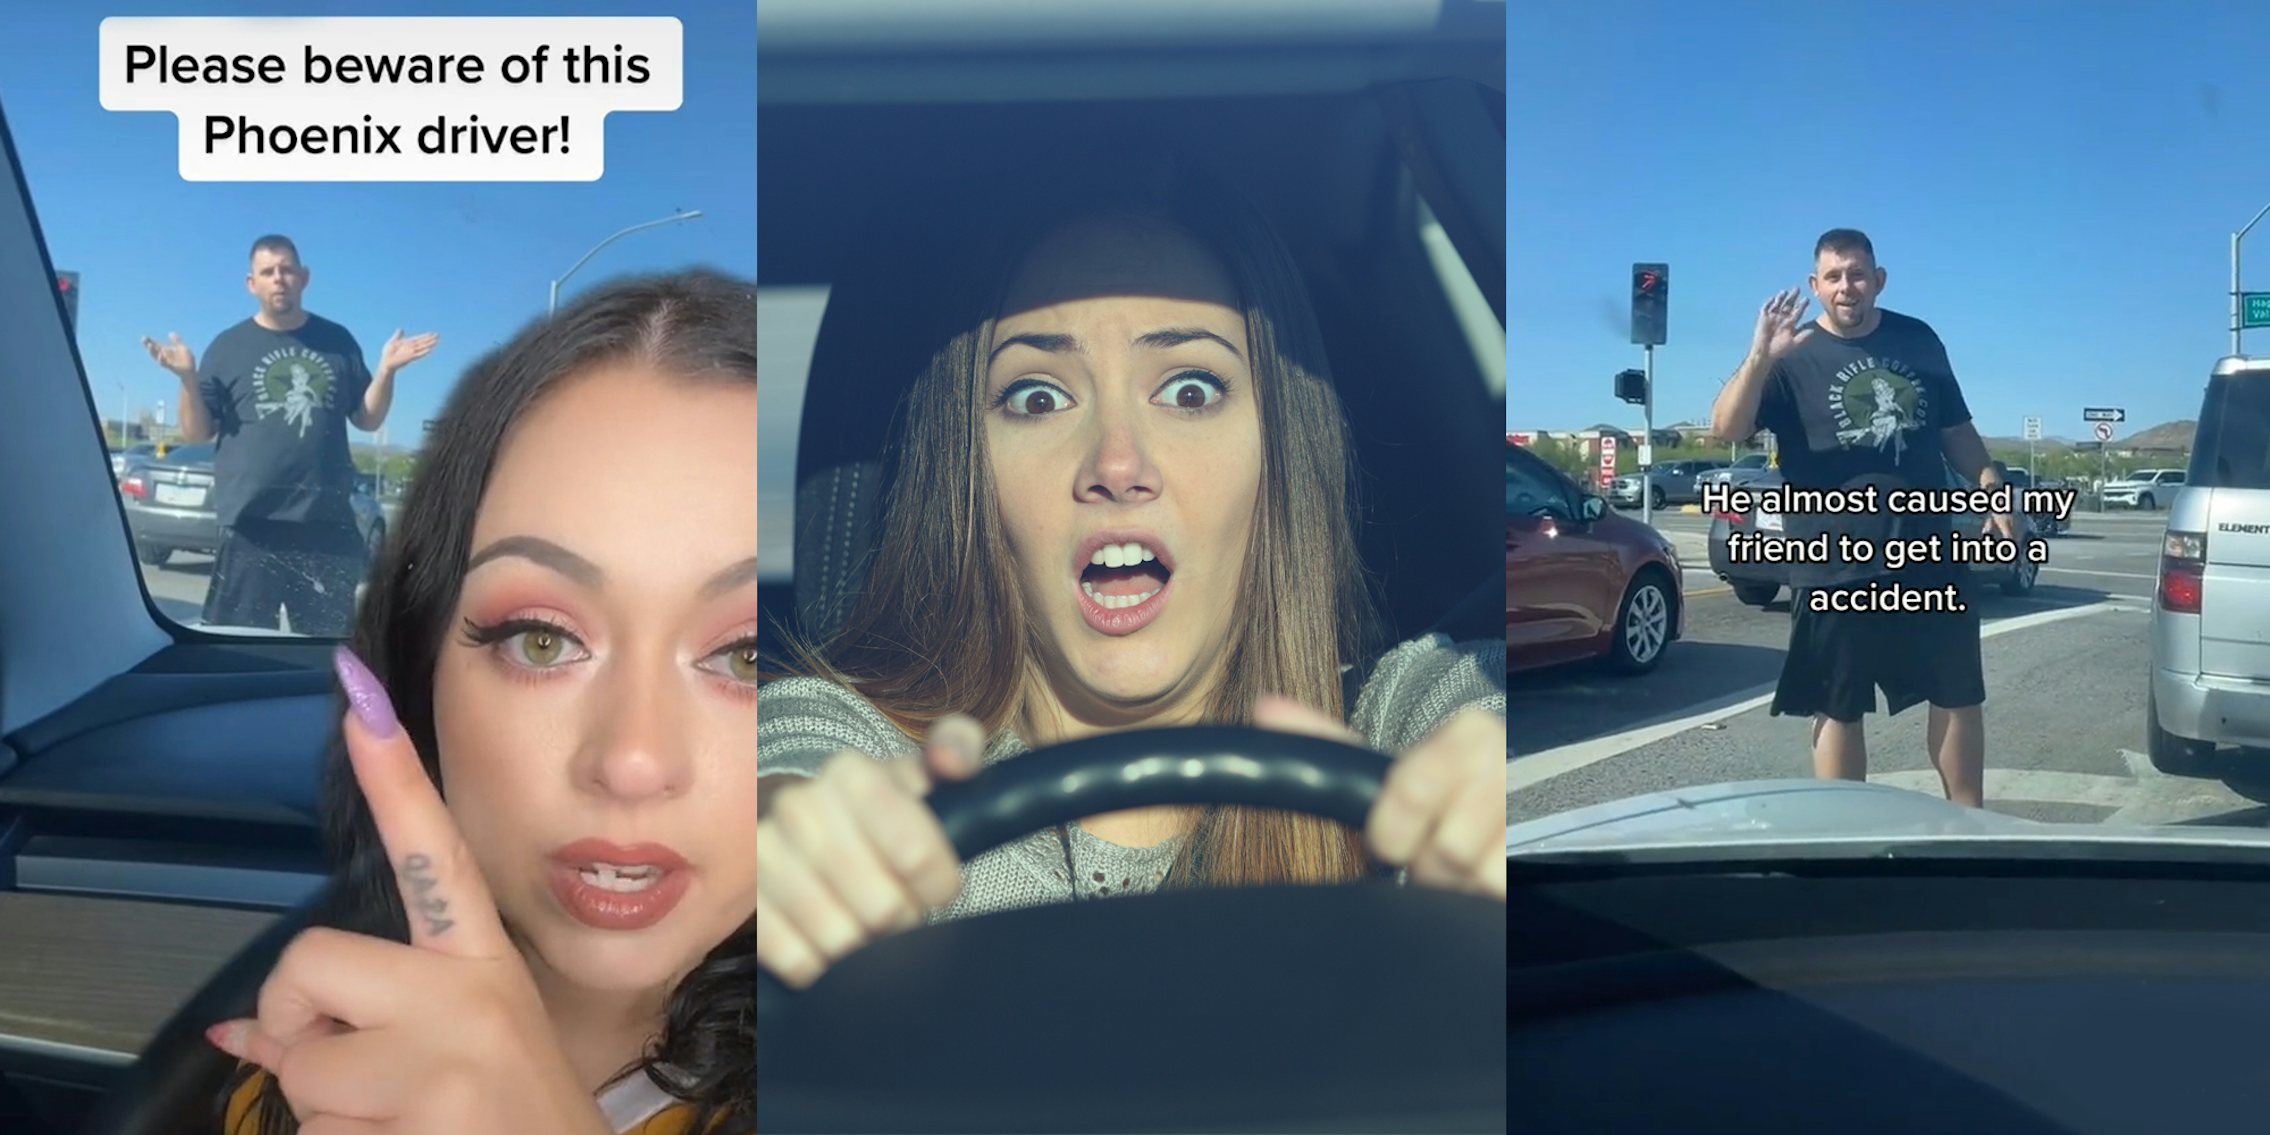 Woman greenscreen TikTok pointing to man in car window putting hands out caption 'Please beware of this Phoenix driver!' (l) woman hands on wheel mouth open scared (c) man through car window putting hand up caption 'He almost caused my friend to get into a accident.' (r)